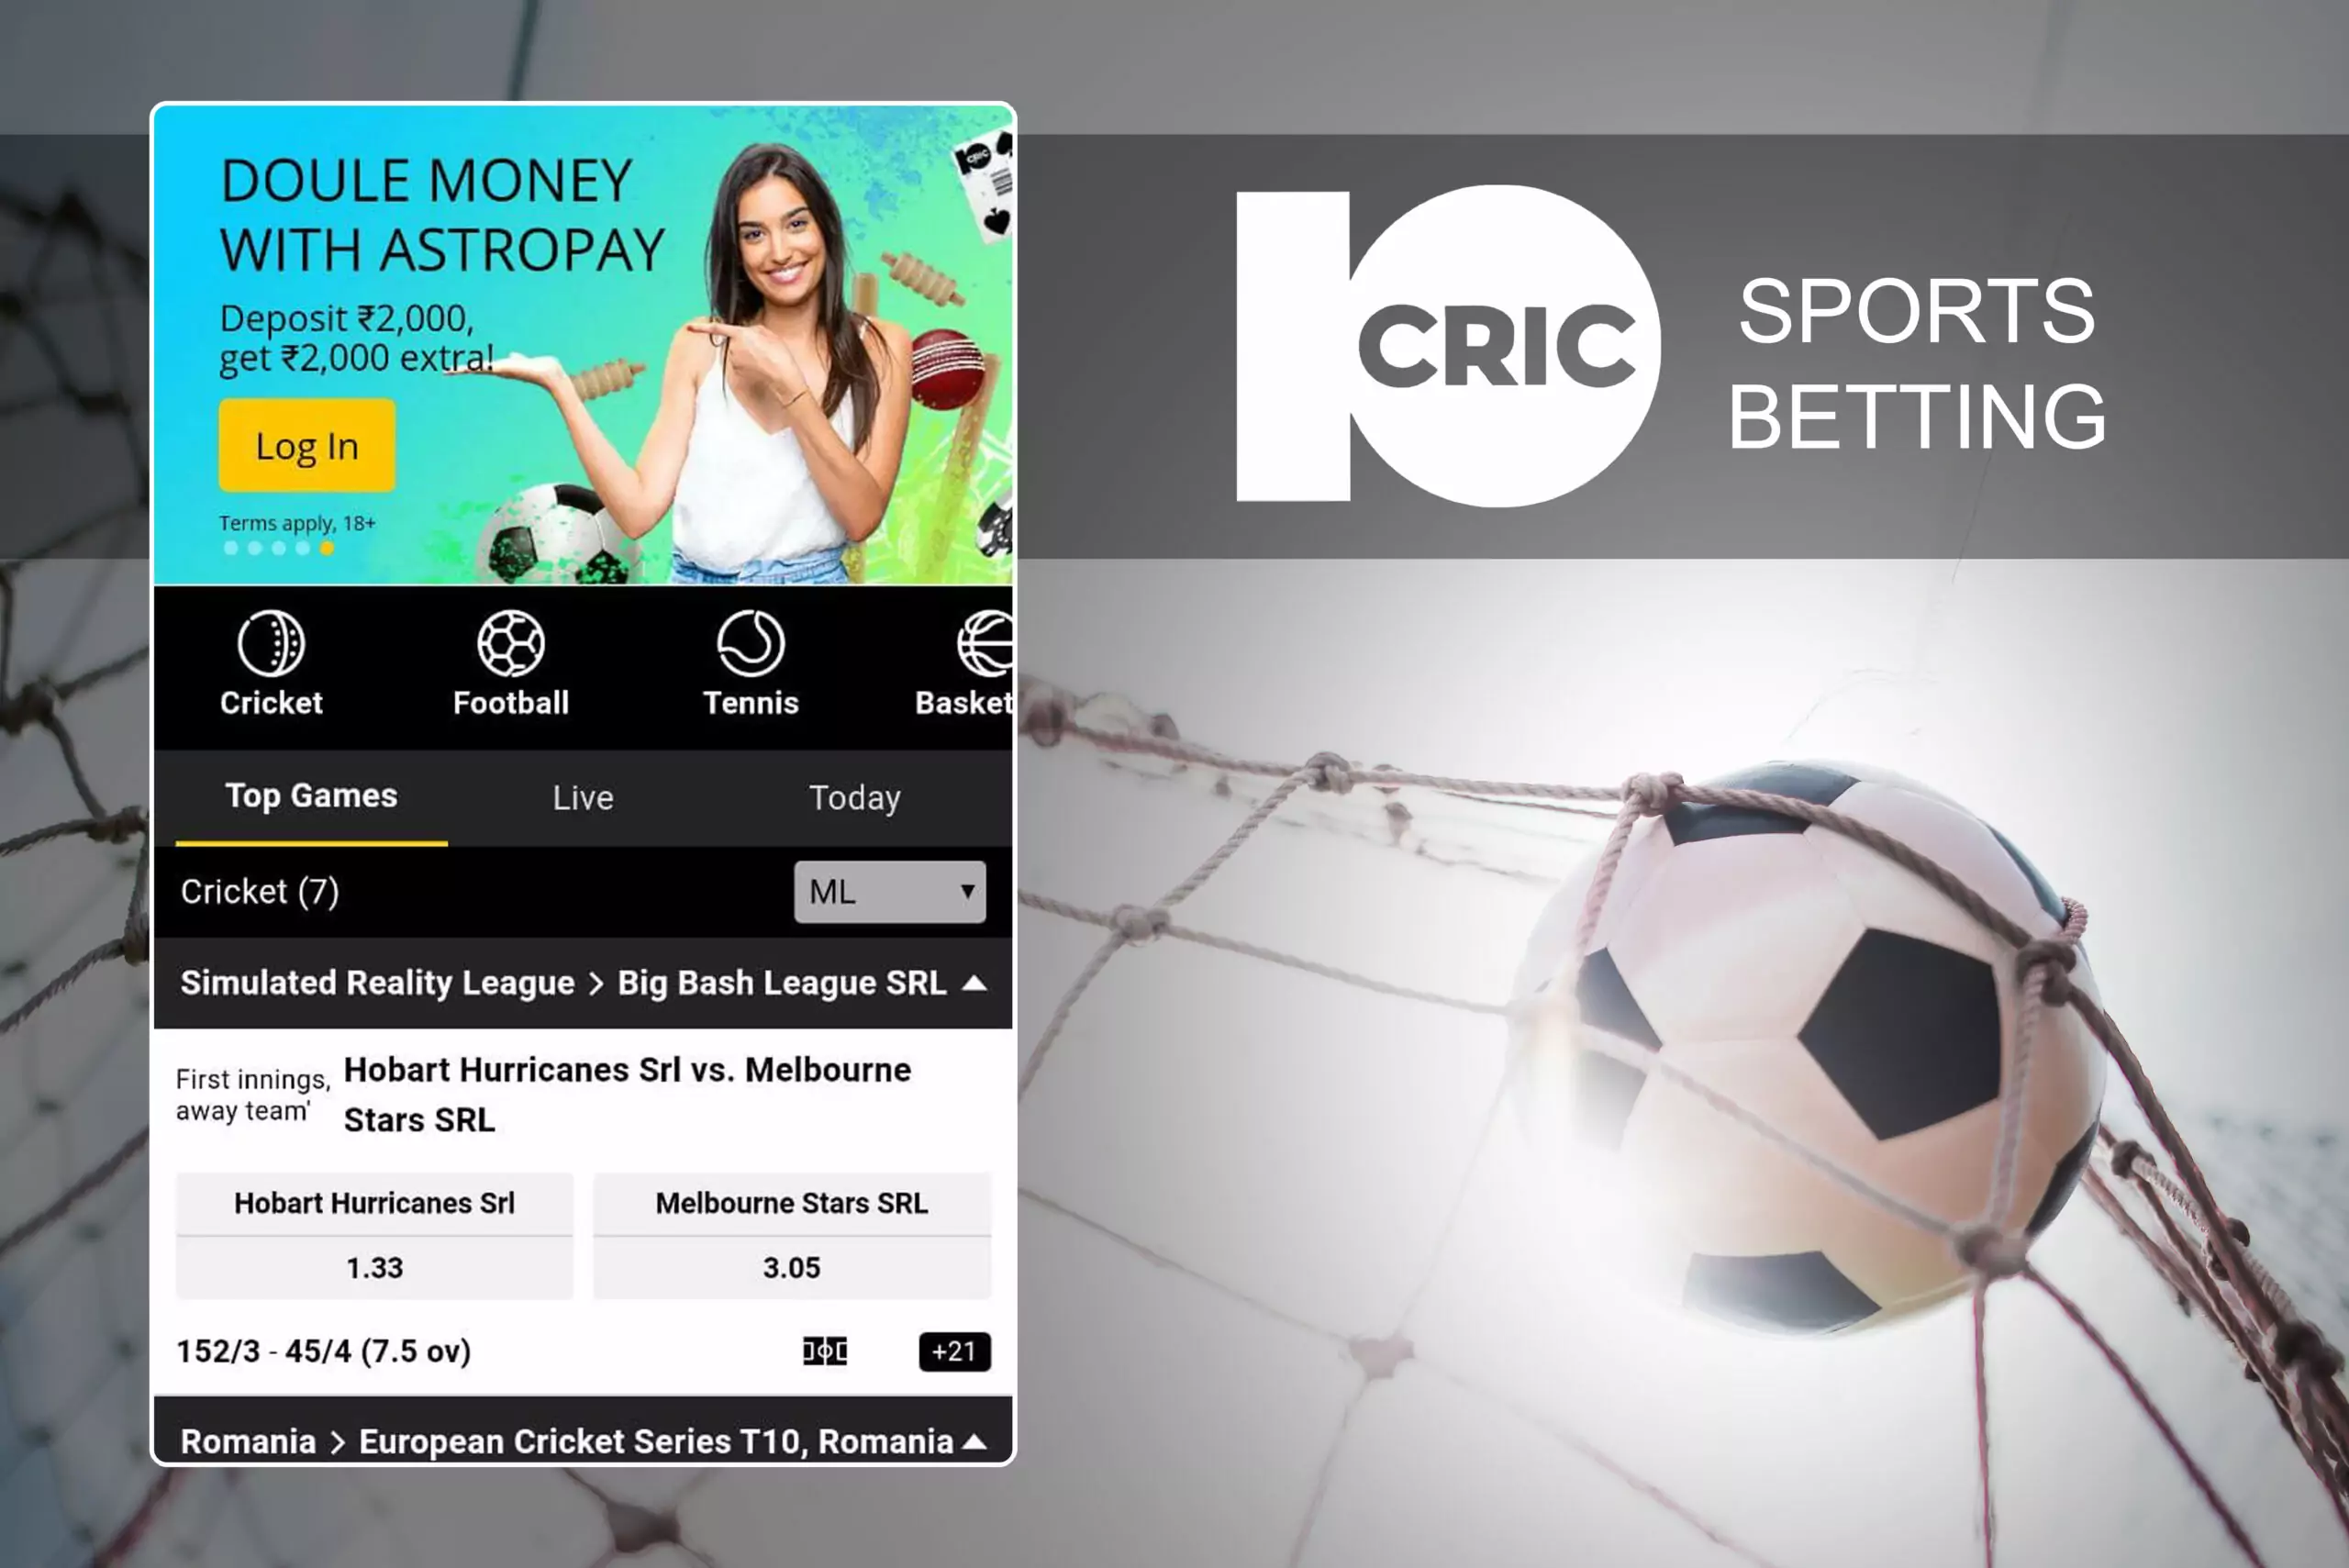 Despite the main sport on the 10cric is cricket, you can place bets on other sport as well.